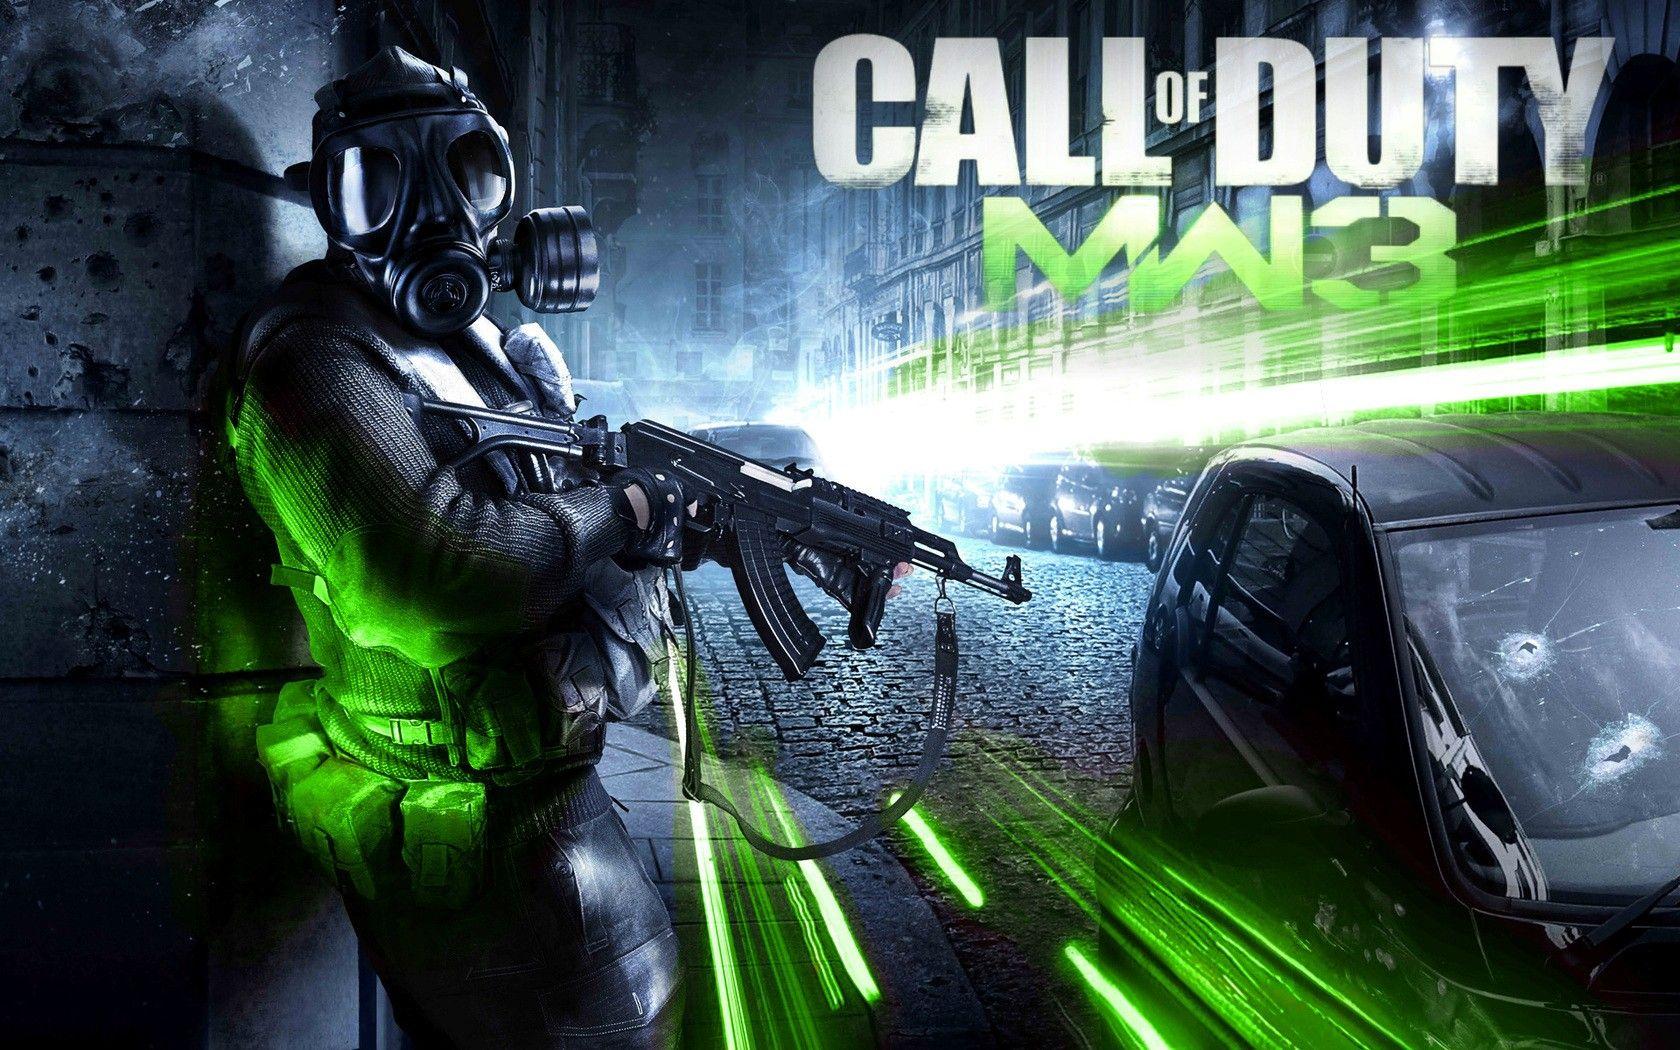 Buy Call of Duty: Modern Warfare 3 and download